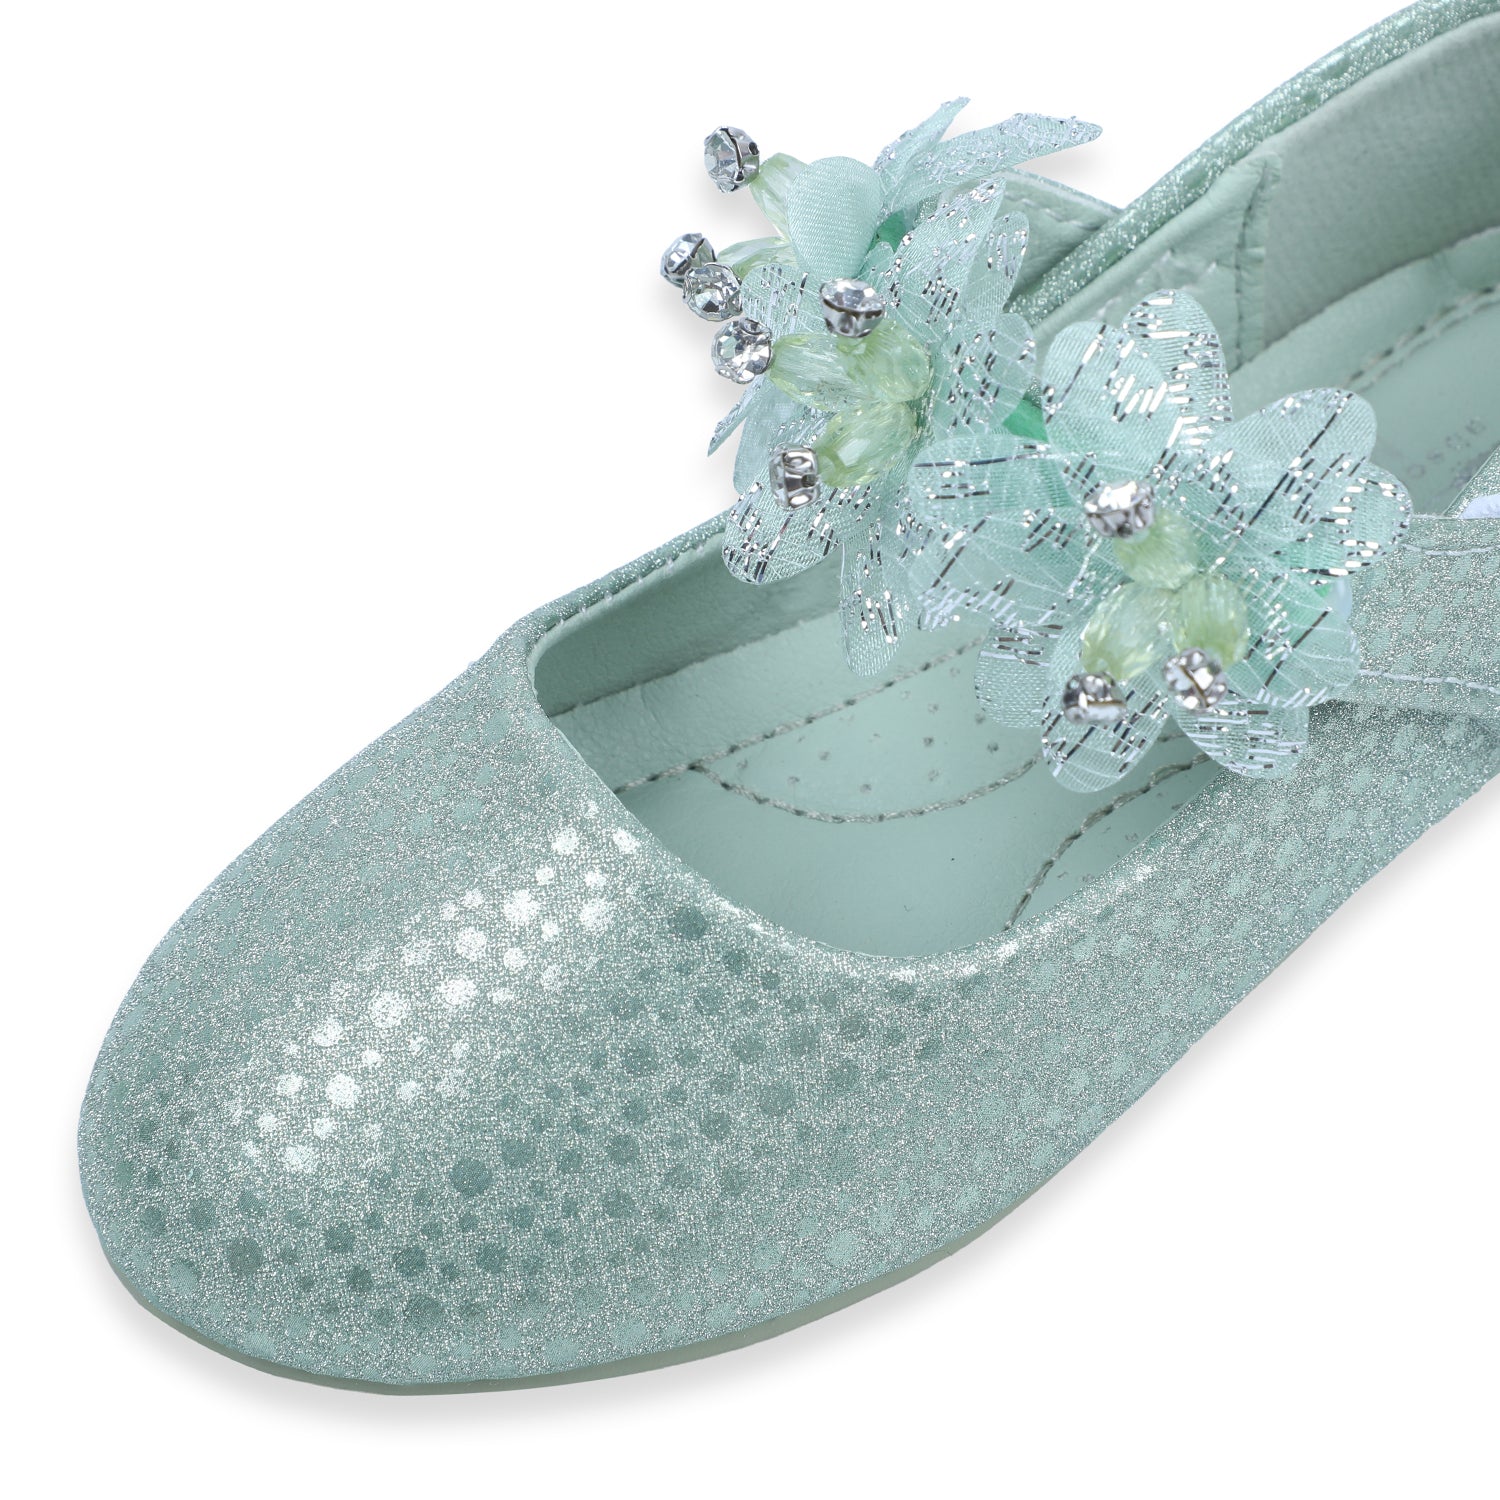 Baby Moo x Bash Kids Ethnic Party Floral Applique Mary Jane Ballerinas - Green